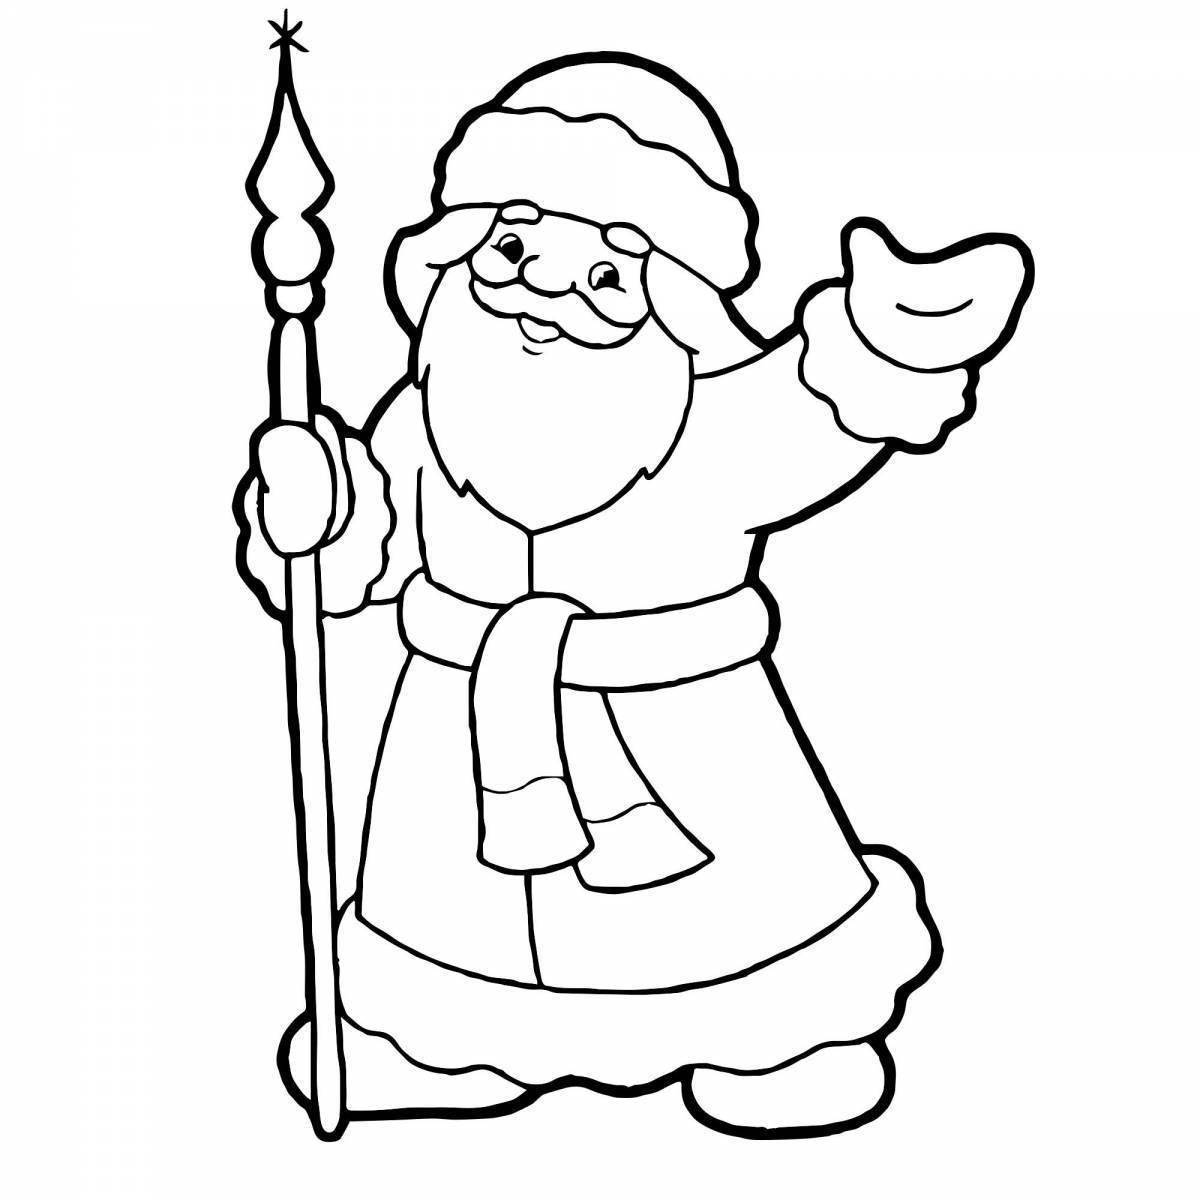 Gorgeous santa claus coloring book for kids